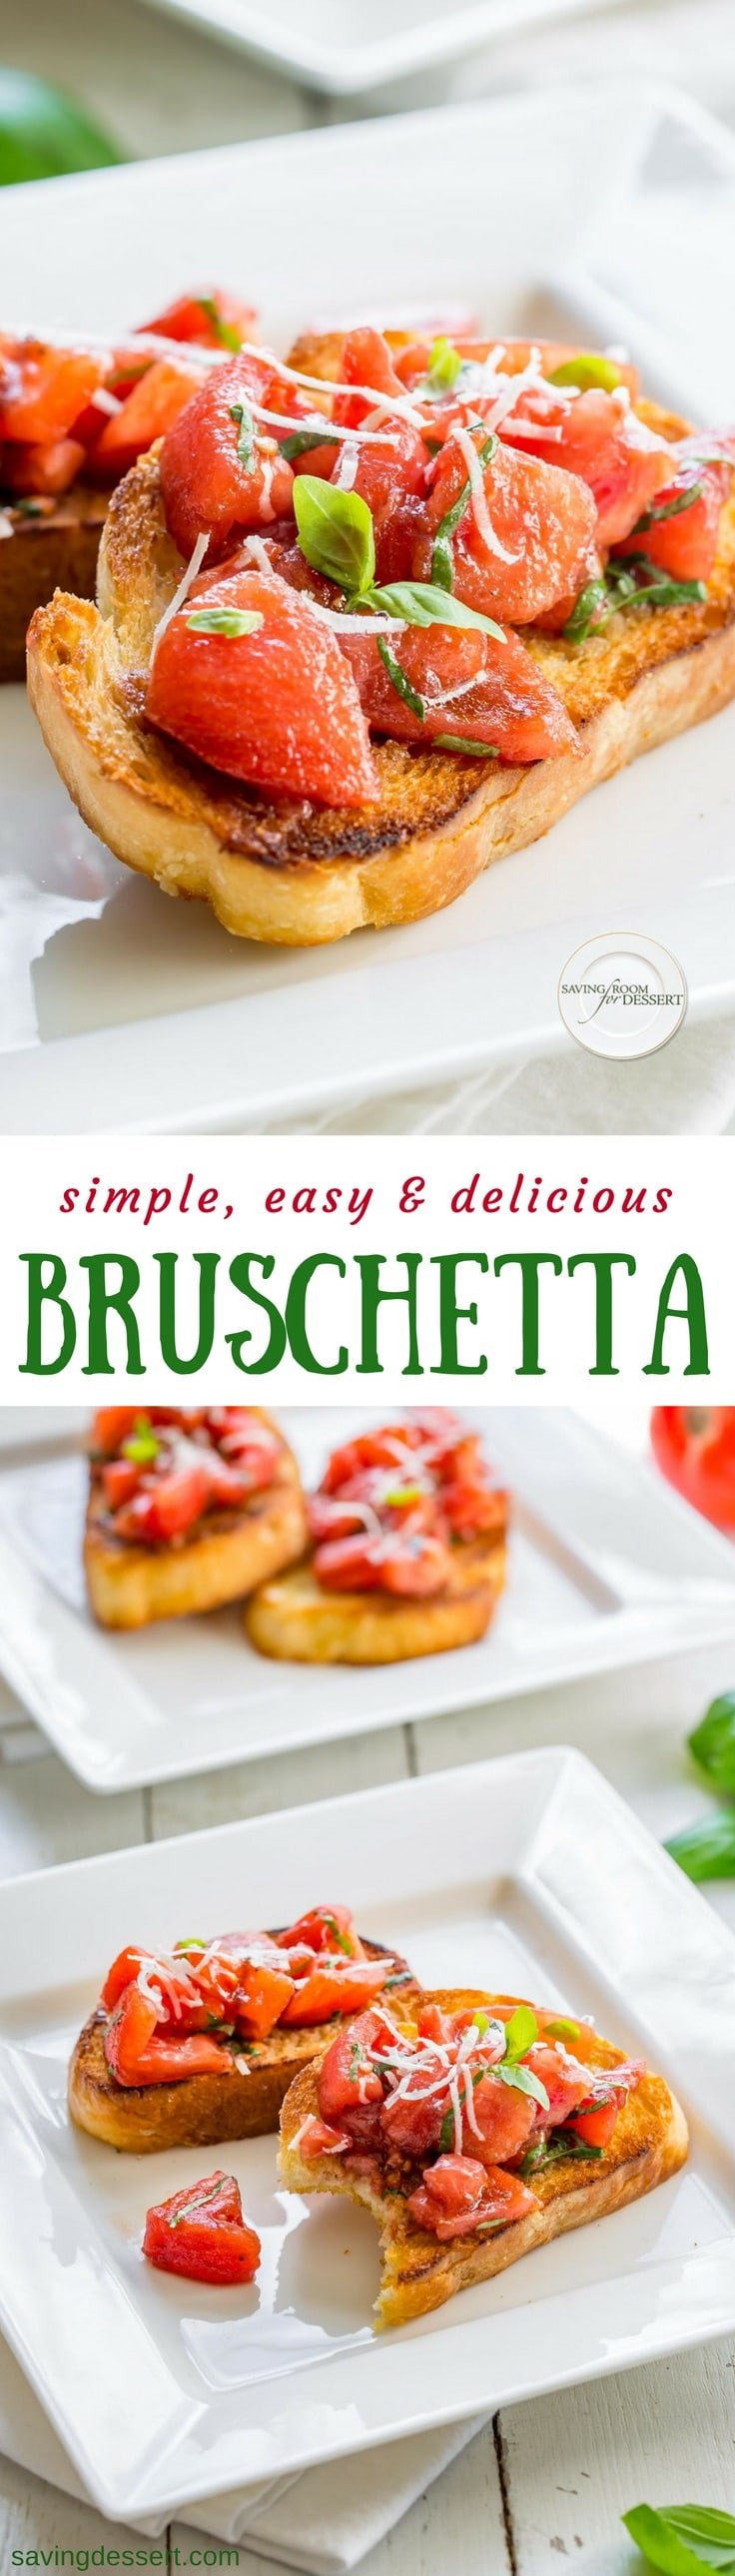 Always the perfect appetizer or accompaniment to delicious soup, our simple, easy and delicious Bruschetta recipe is so much more than tomatoes on toast! www.savingdessert.com #savingdessert.com #bruschetta #tomatoes #italian #appetizer #bread